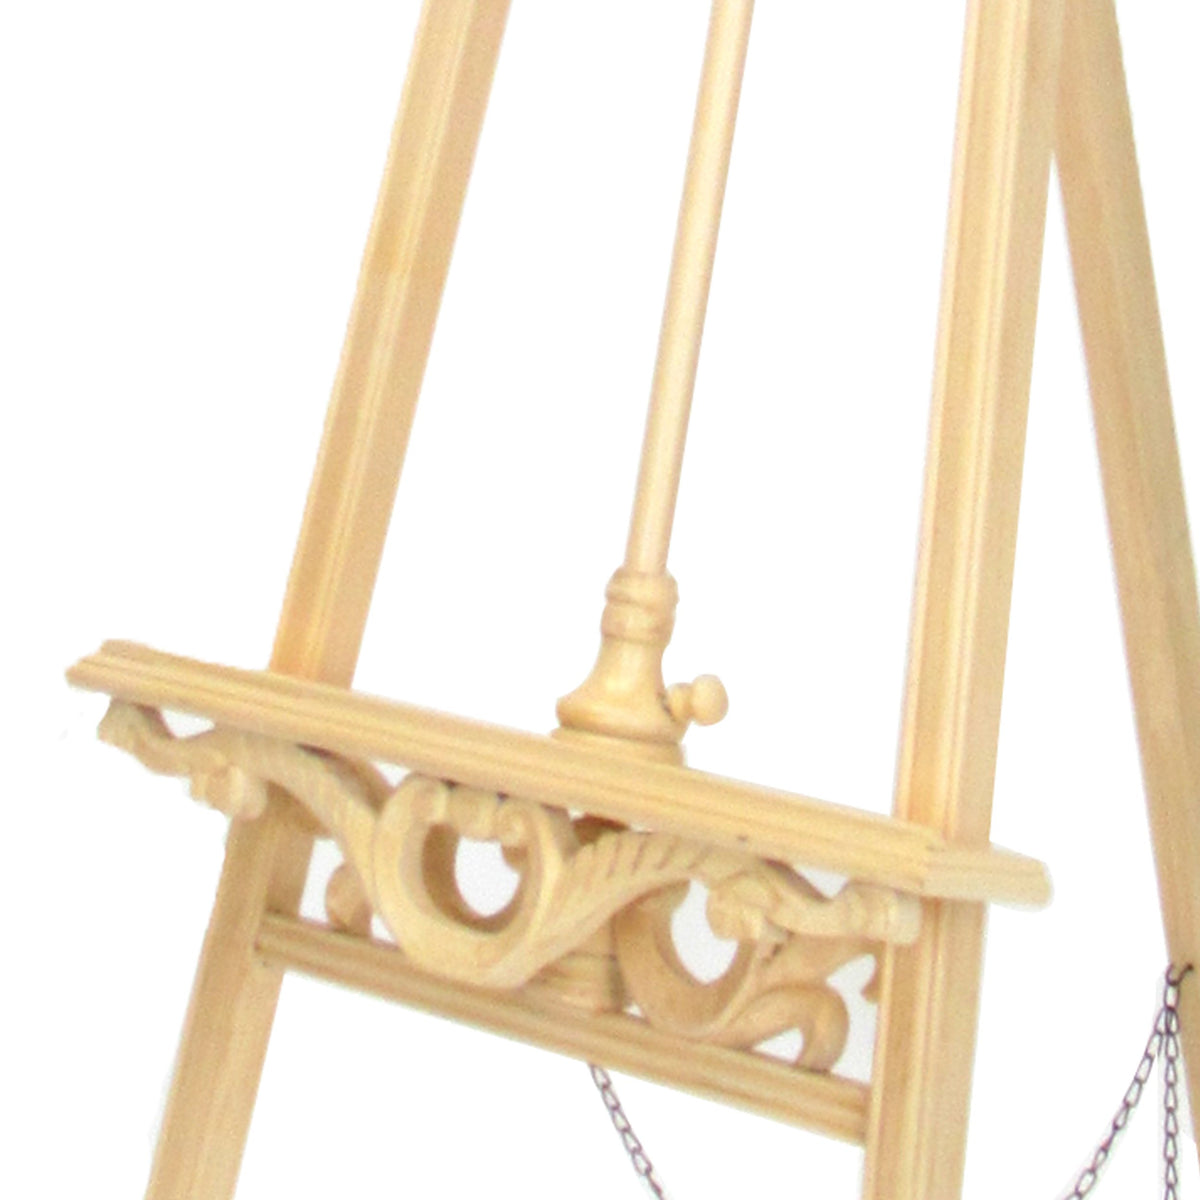 Traditional Style Wooden Easel with Scrollwork Details, Antique White - BM210460